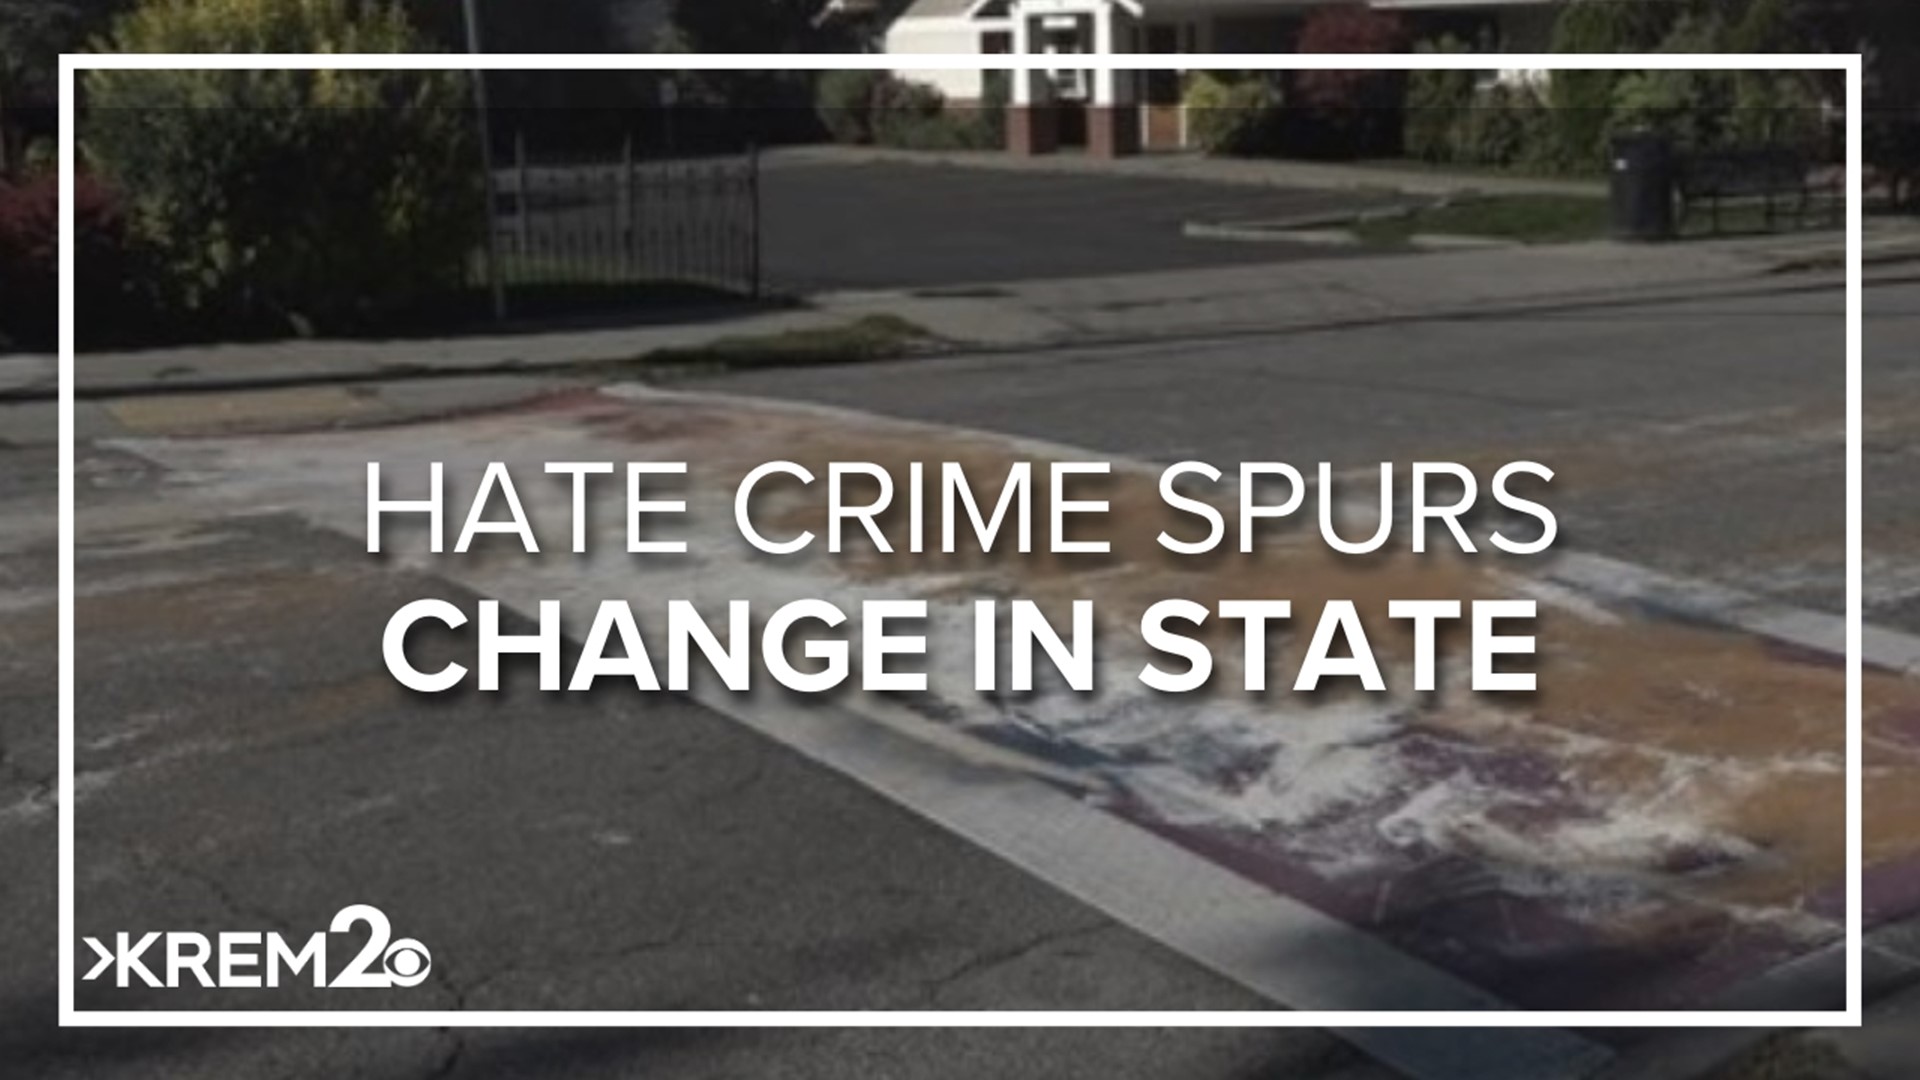 Washington lawmakers are looking to change the definition of a hate crime following repeated vandalism in Spokane.